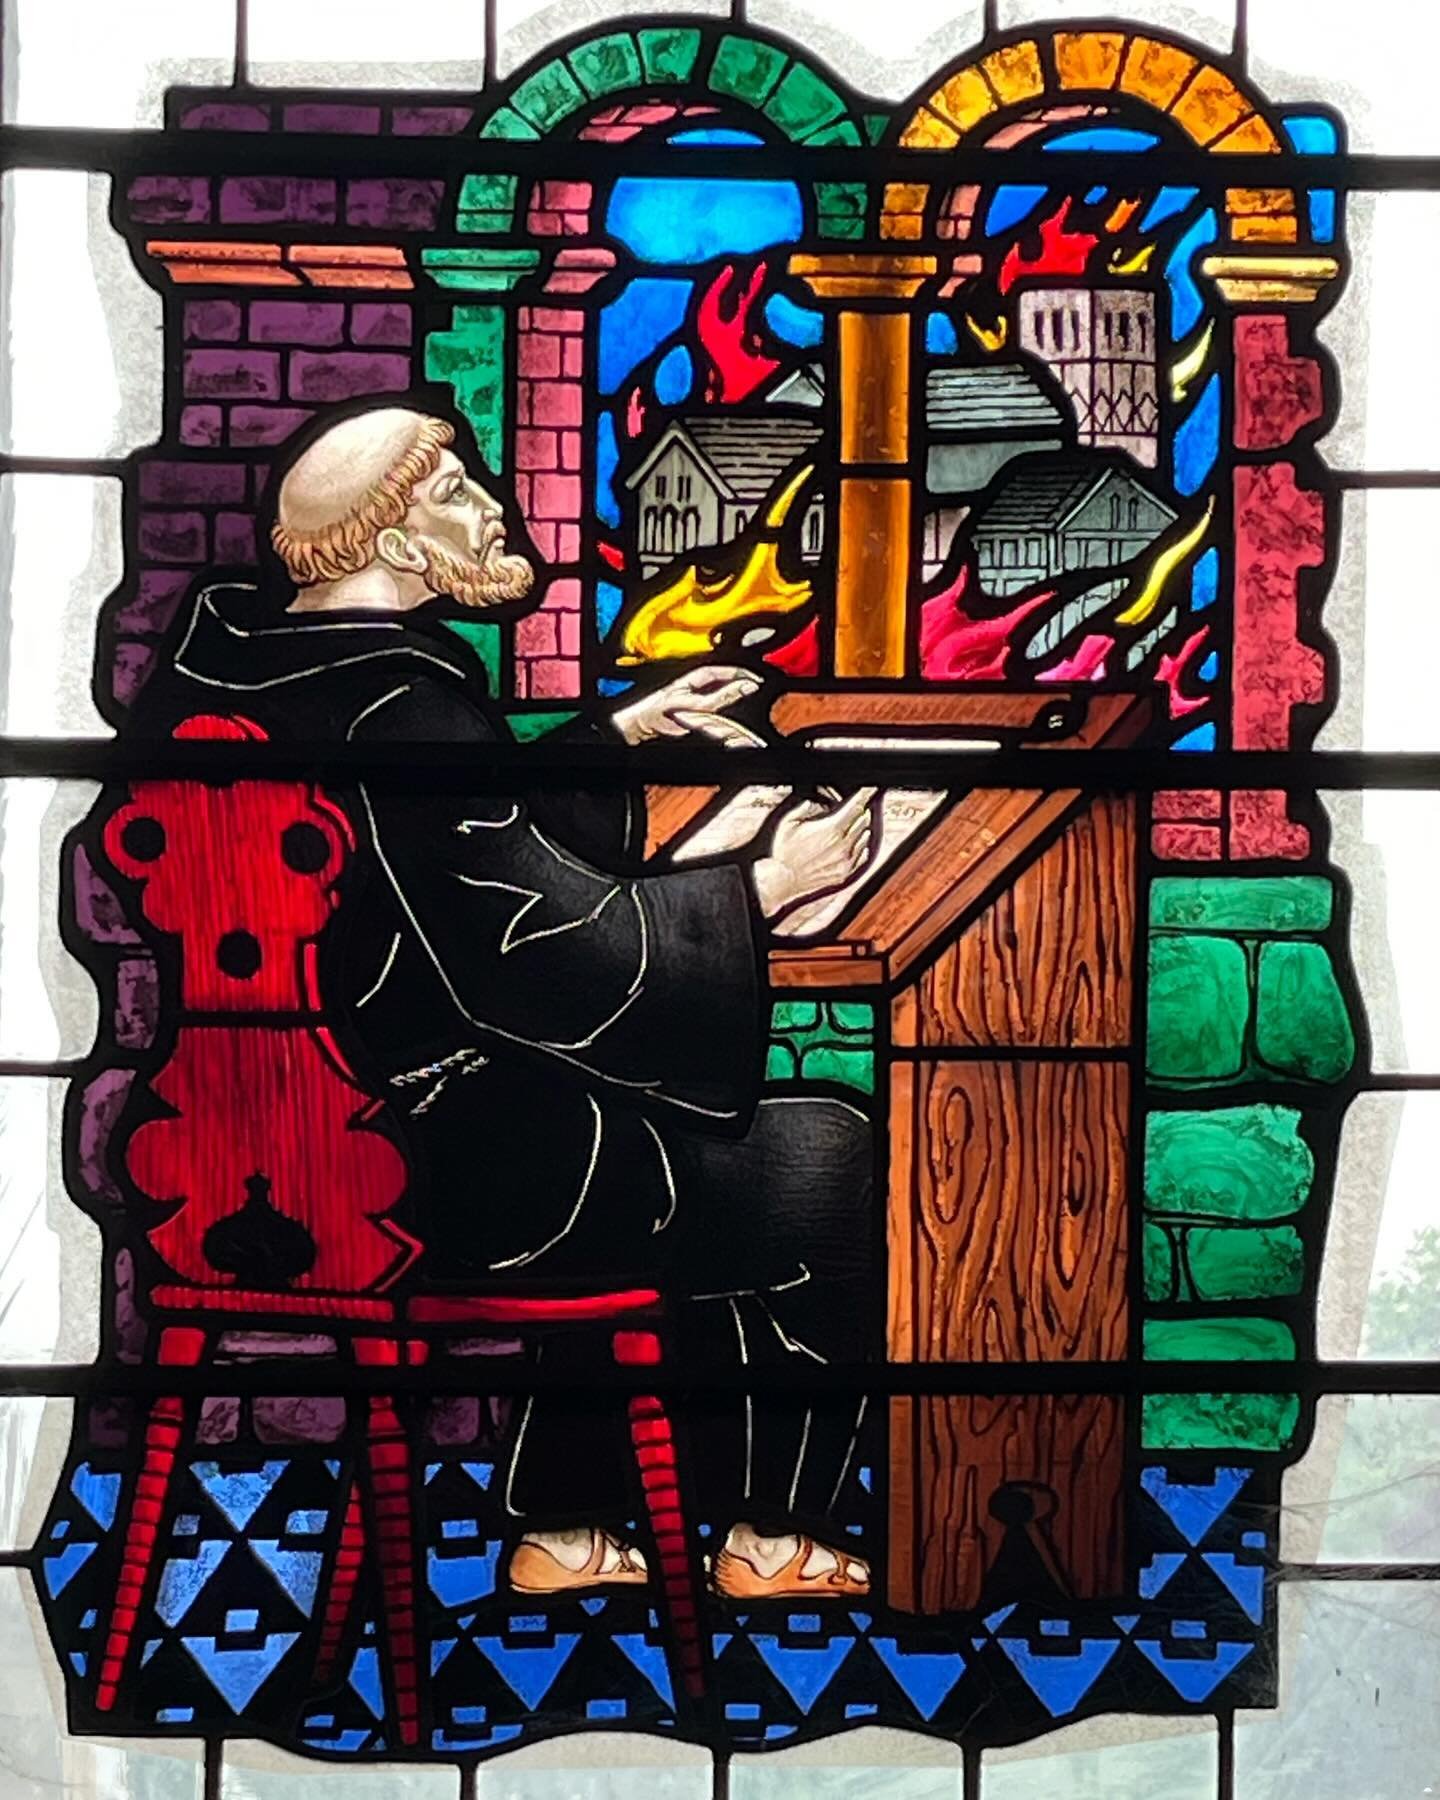 I&rsquo;ve been to Peterborough many times, but this is my first visit inside the cathedral. Enjoying the stained glass depiction of Hugh Candidus, the Chronicler, writing &ldquo;the abbey is in flames&rdquo;, as it was in 1116.